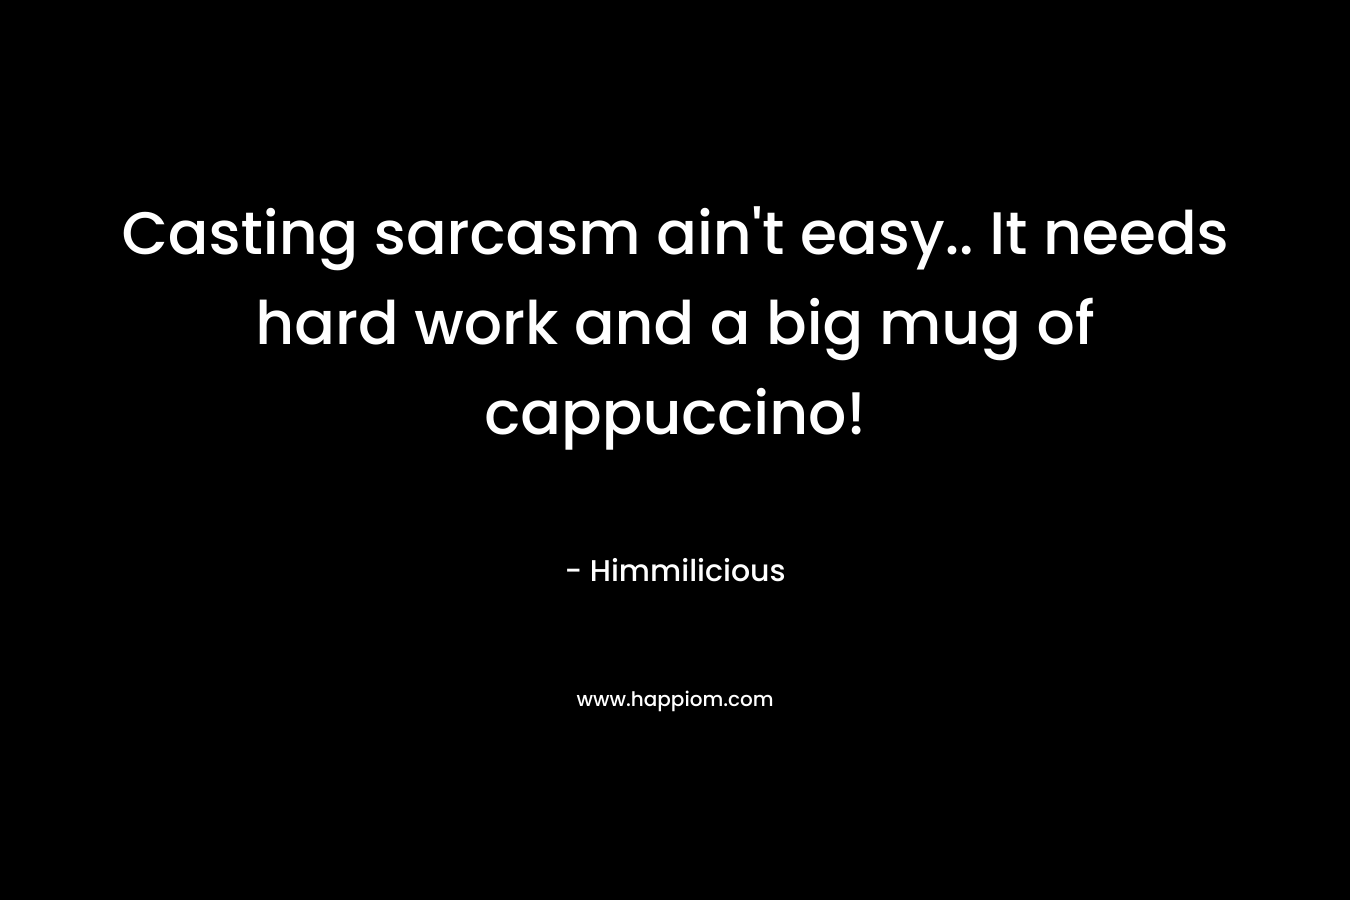 Casting sarcasm ain’t easy.. It needs hard work and a big mug of cappuccino! – Himmilicious